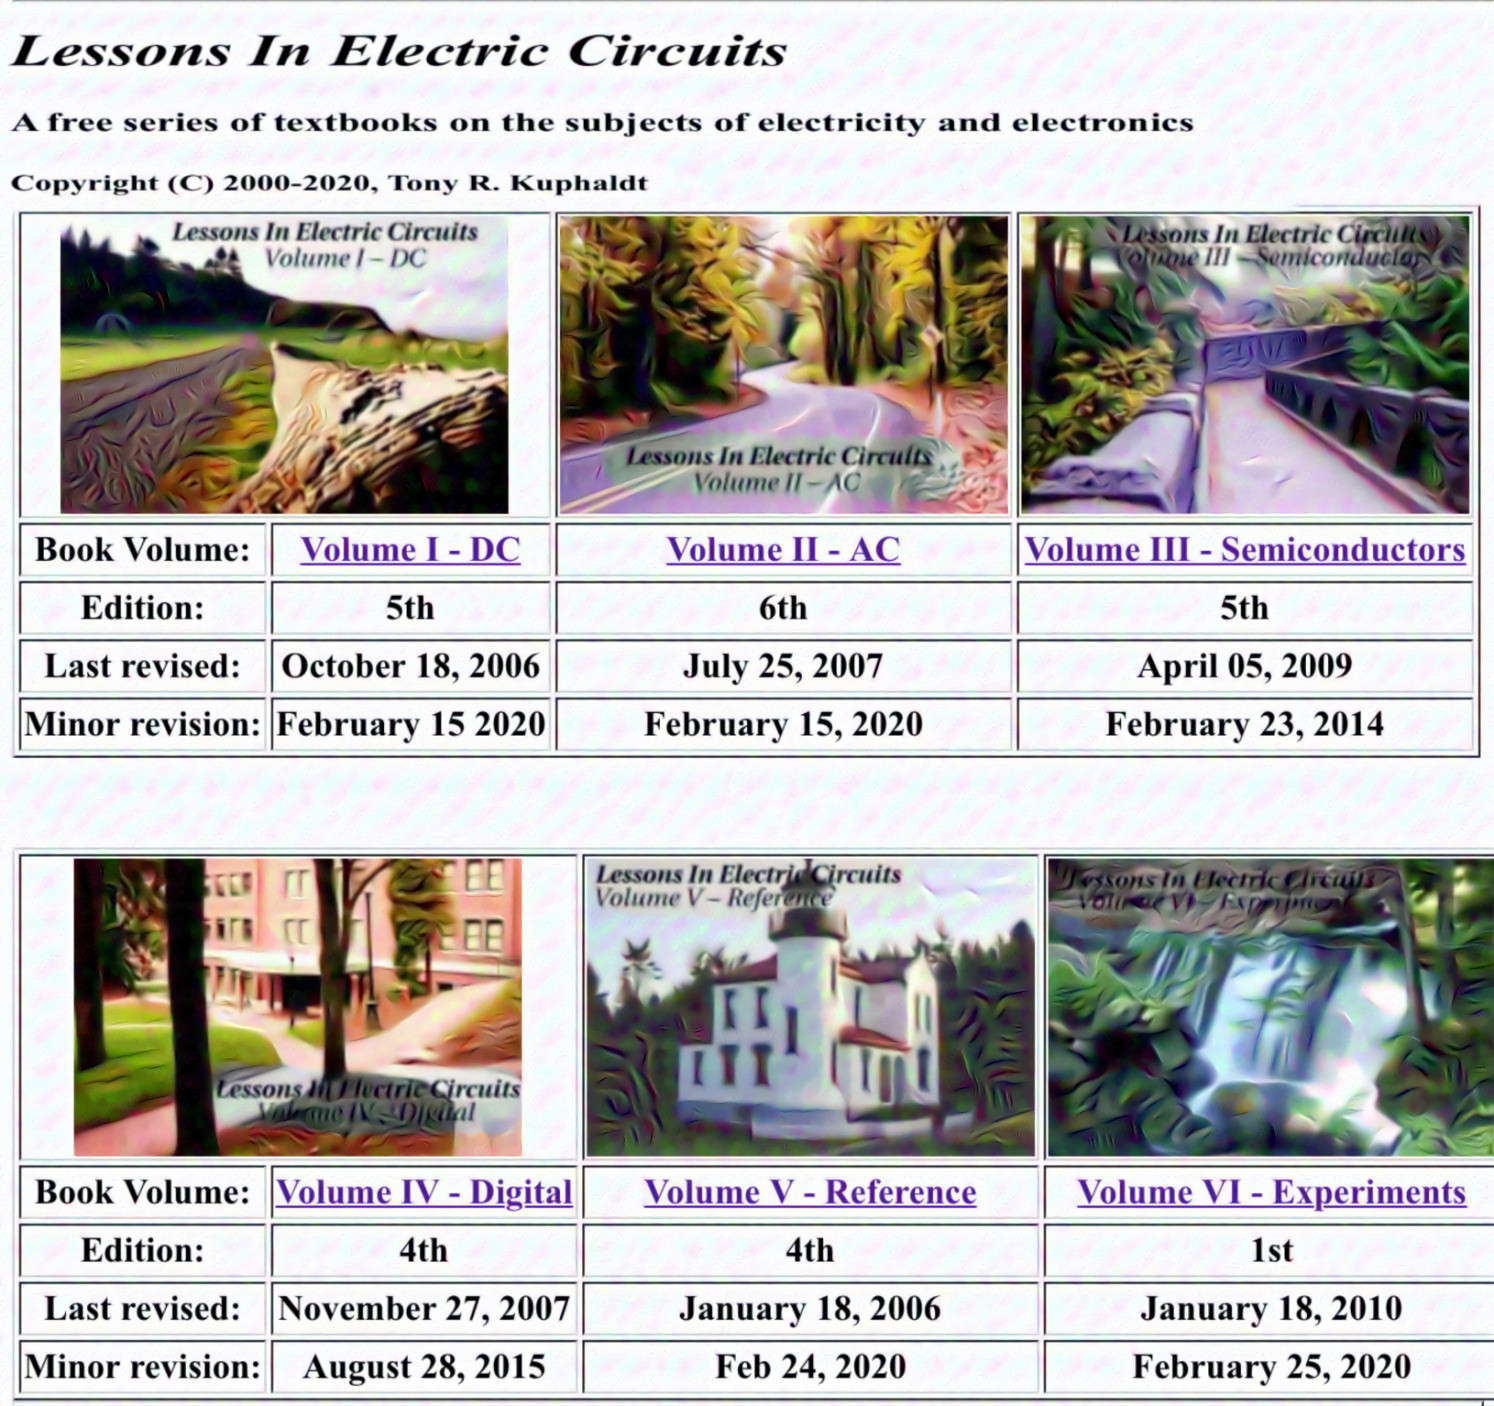 Know Things To Make Things ... Lessons In Electric Circuits — A free series of 6 textbooks on the subjects of electricity and electronics — PDFs 0n page — Copyright (C) 2000-2020, Tony R. Kuphaldt — https://www.ibiblio.org/kuphaldt/electricCircuits/ ...